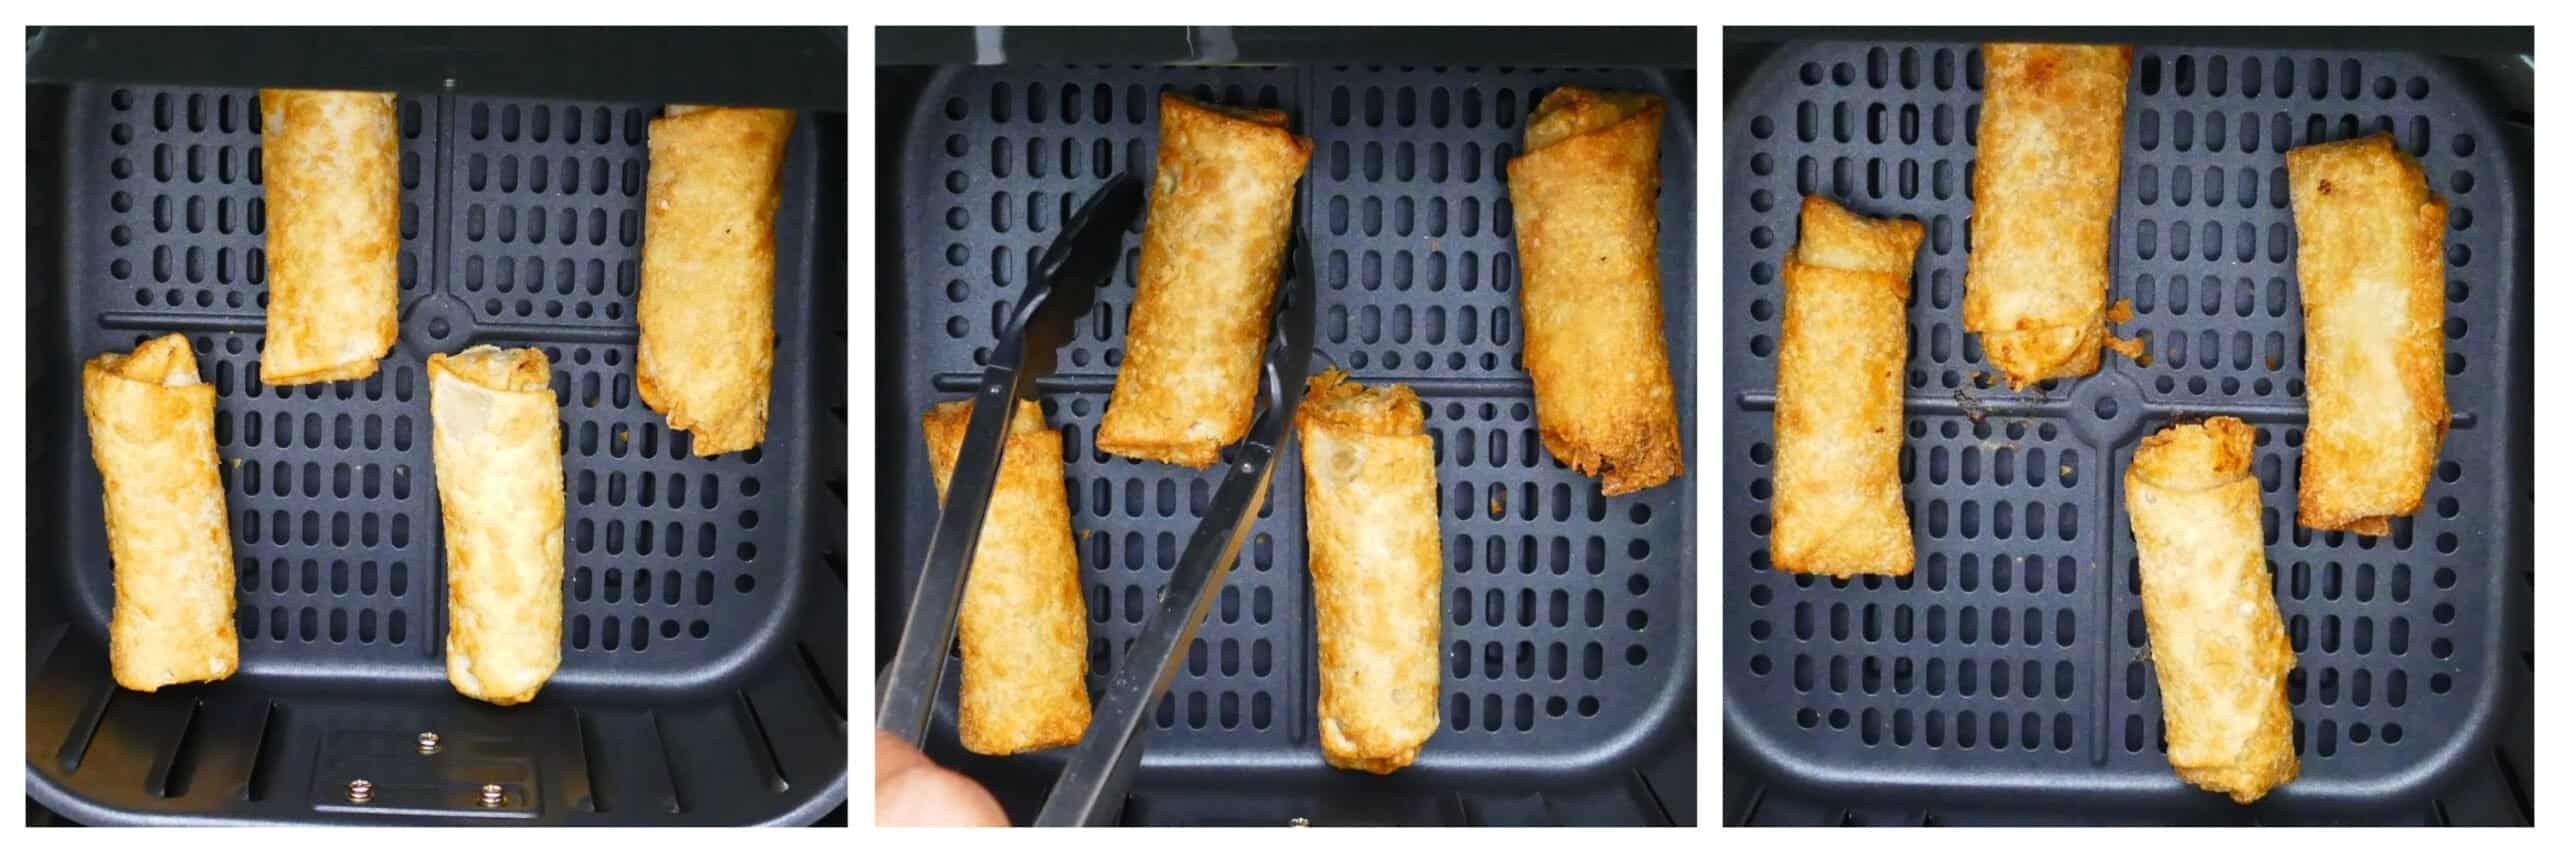 Air Fryer Frozen Egg Rolls collage - uncooked egg rolls in basket, being turned with tongs, cooked egg rolls